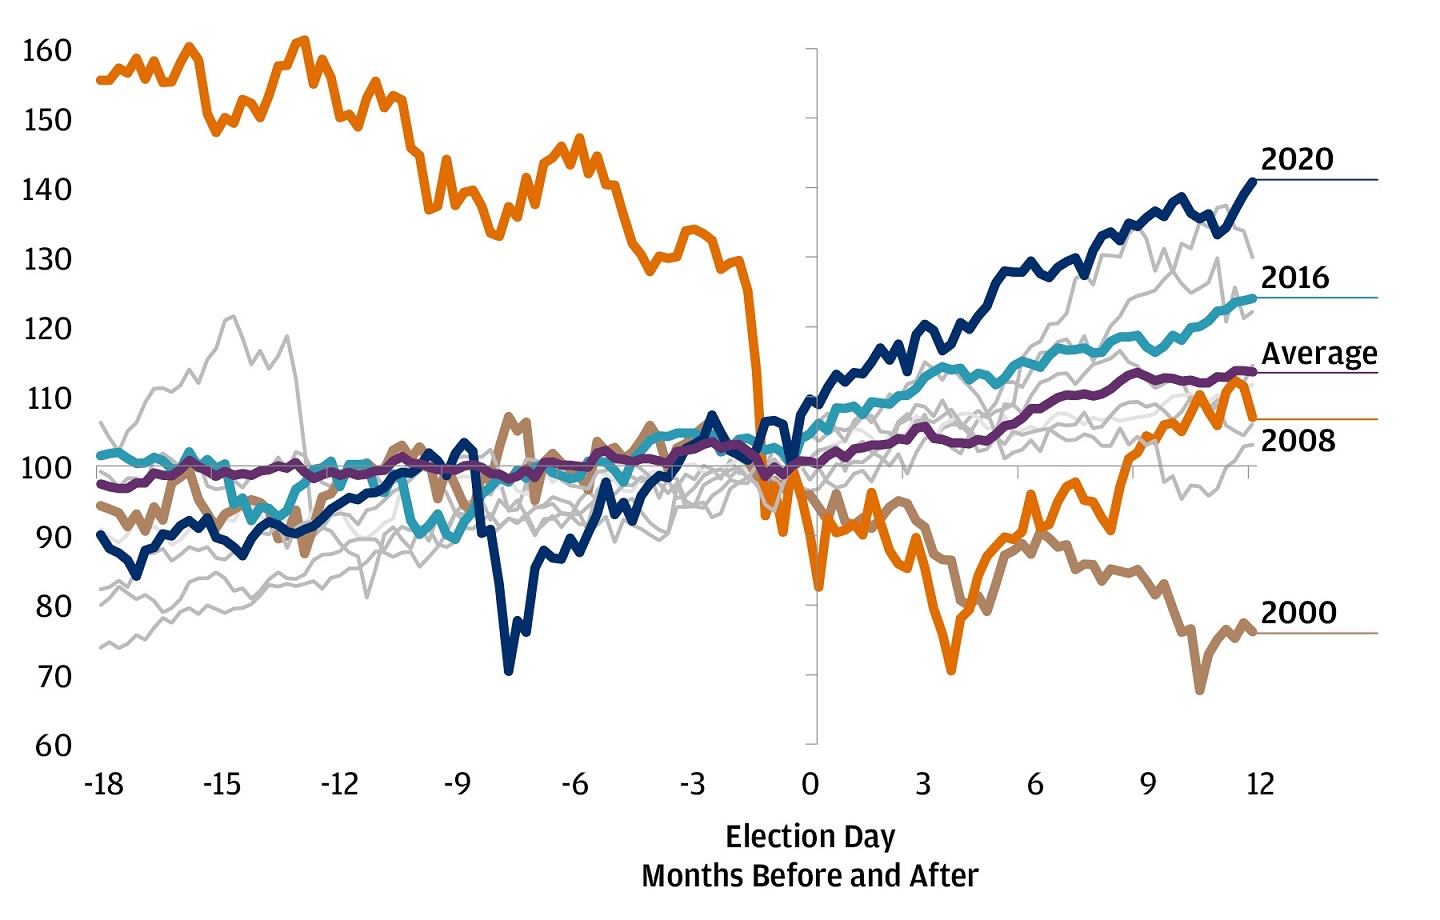 This chart shows the S&P 500 price changes in the months before and after U.S. election days from 1984 to 2020.